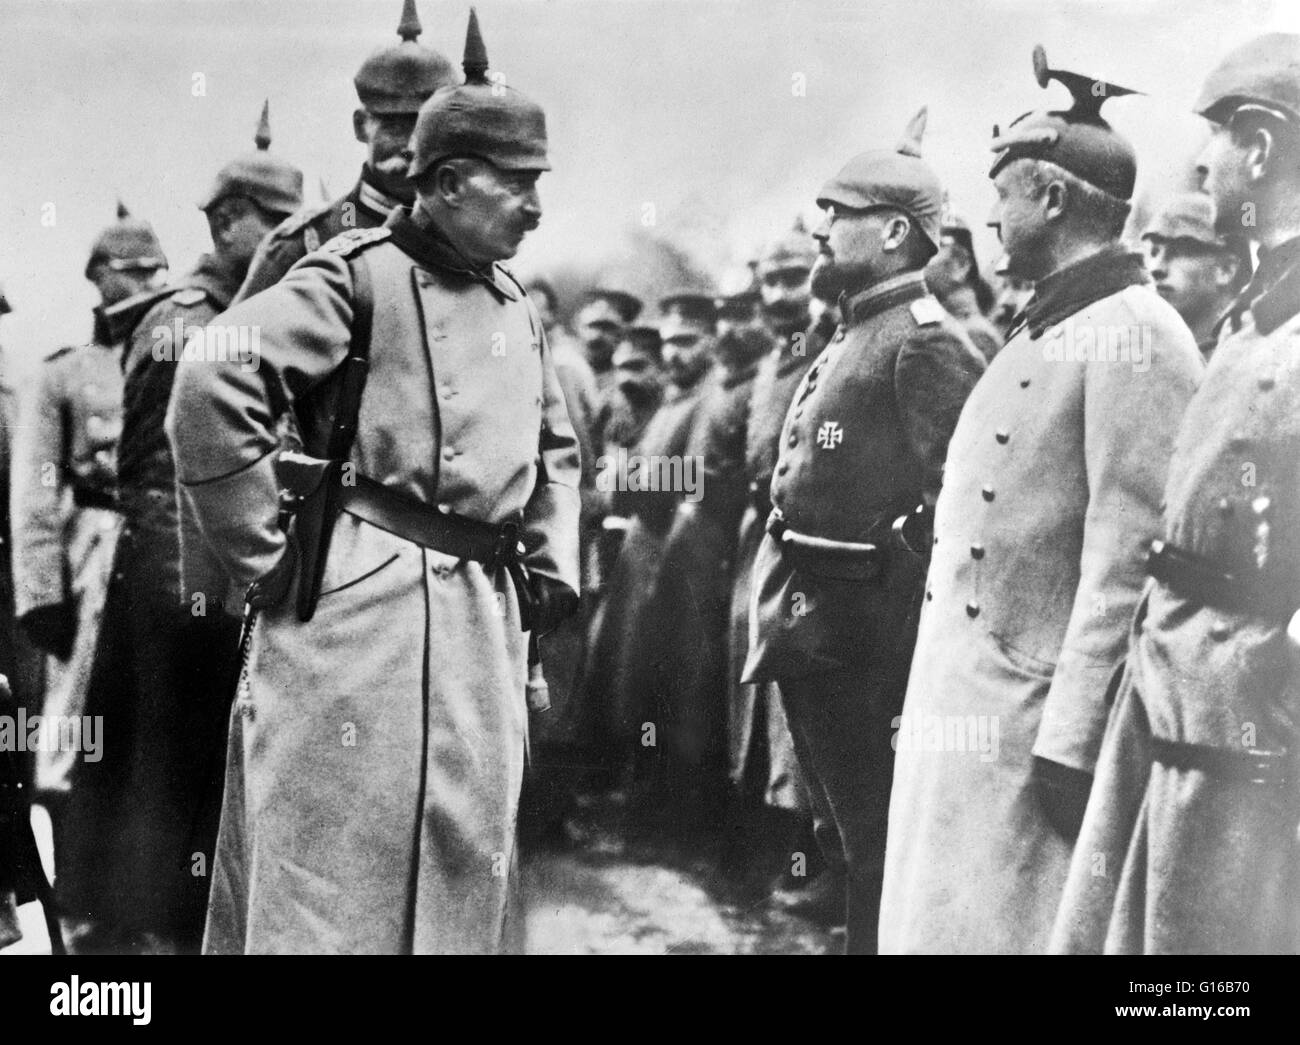 Kaiser Wilhelm II (1859-1941), the last German Emperor and King of Prussia, with troops during World War I. Wilhelm II (January 27, 1859 - June 4, 1941) was the last German Kaiser and King of Prussia, ruling the German Empire and the Kingdom of Prussia fr Stock Photo